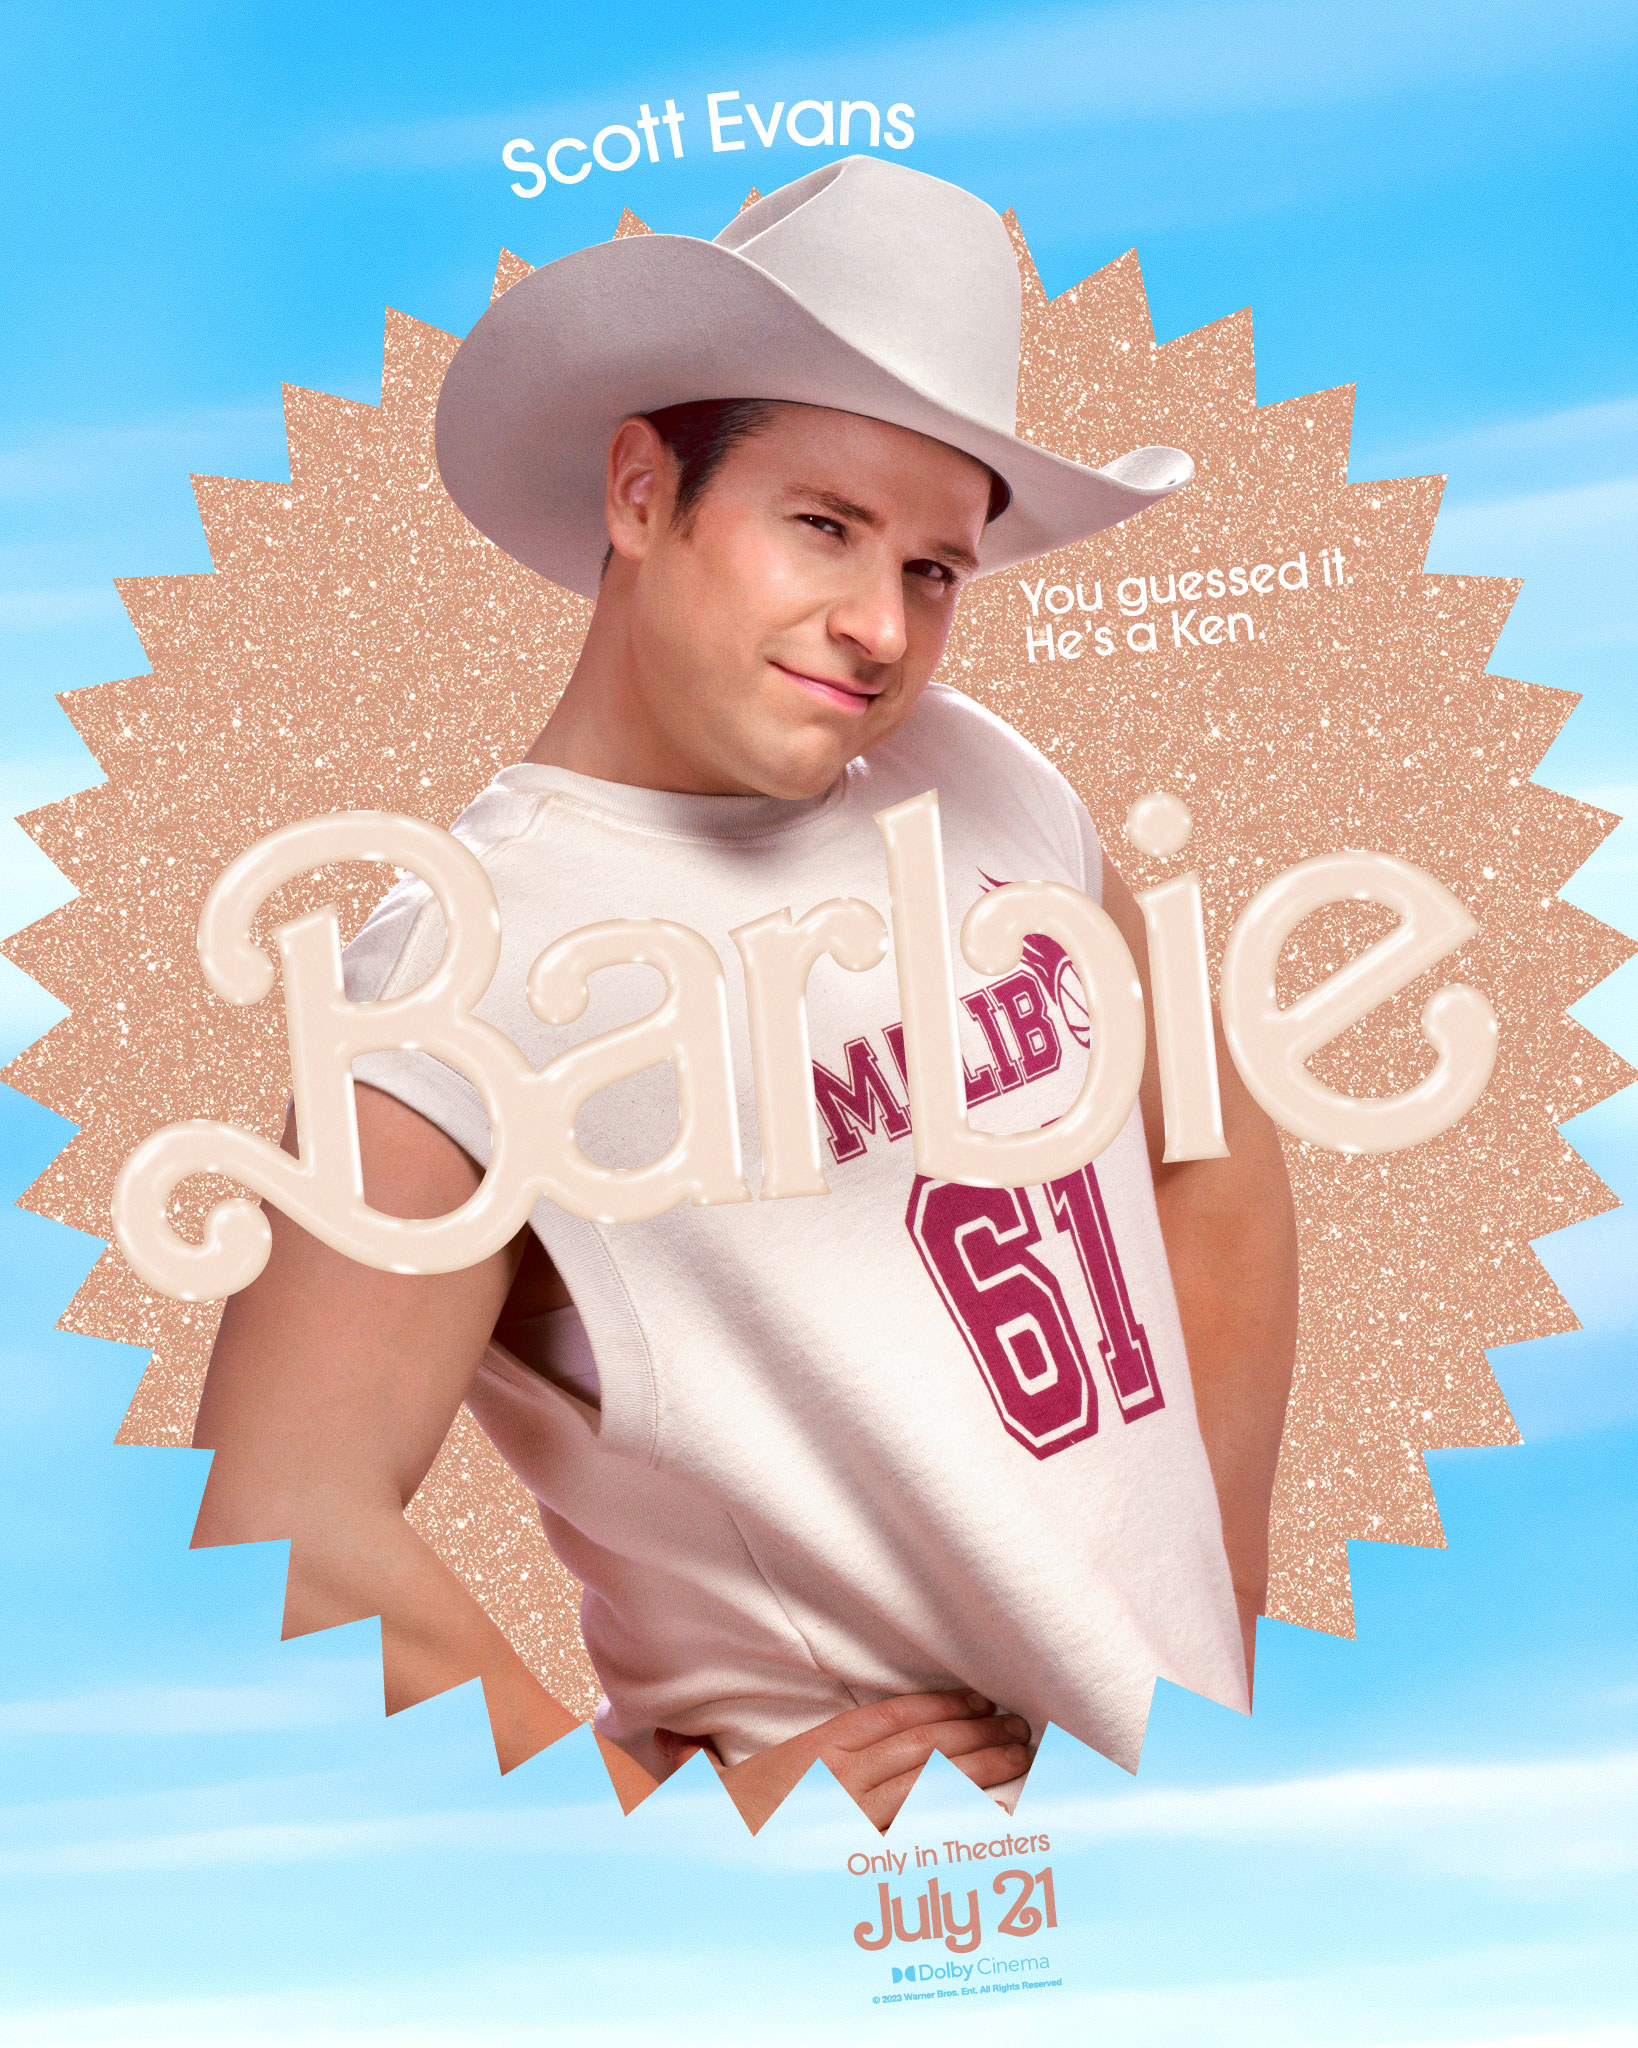 Scott Evans on a &quot;Barbie&quot; poster wearing a sleeveless shirt with the number 61 and a cowboy hat